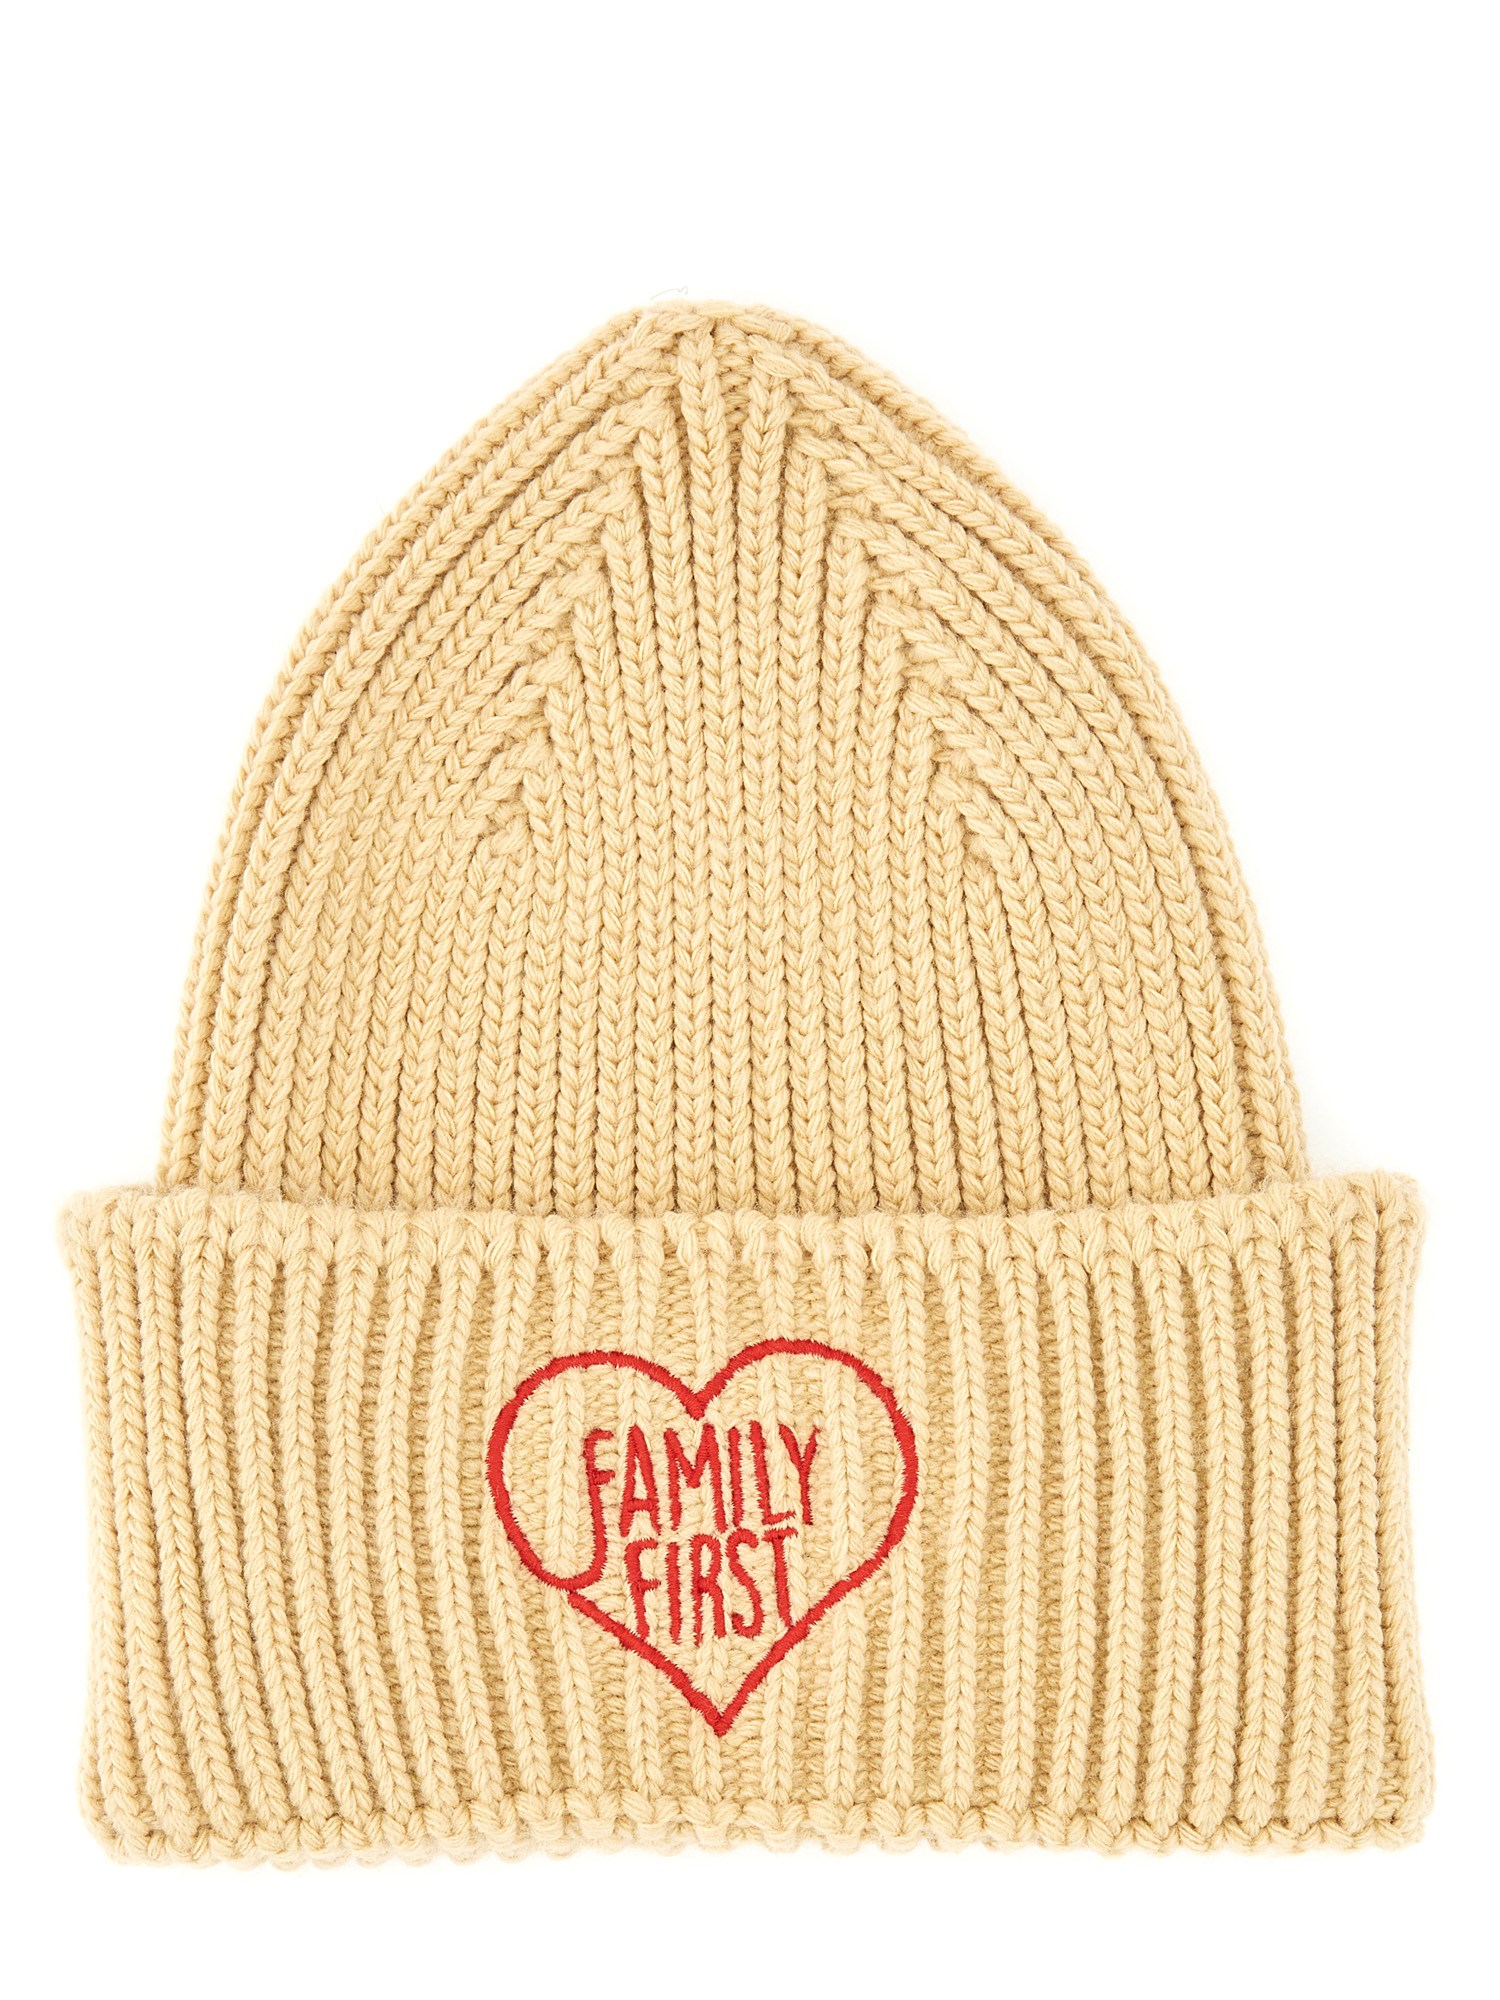 Family First family first beanie hat